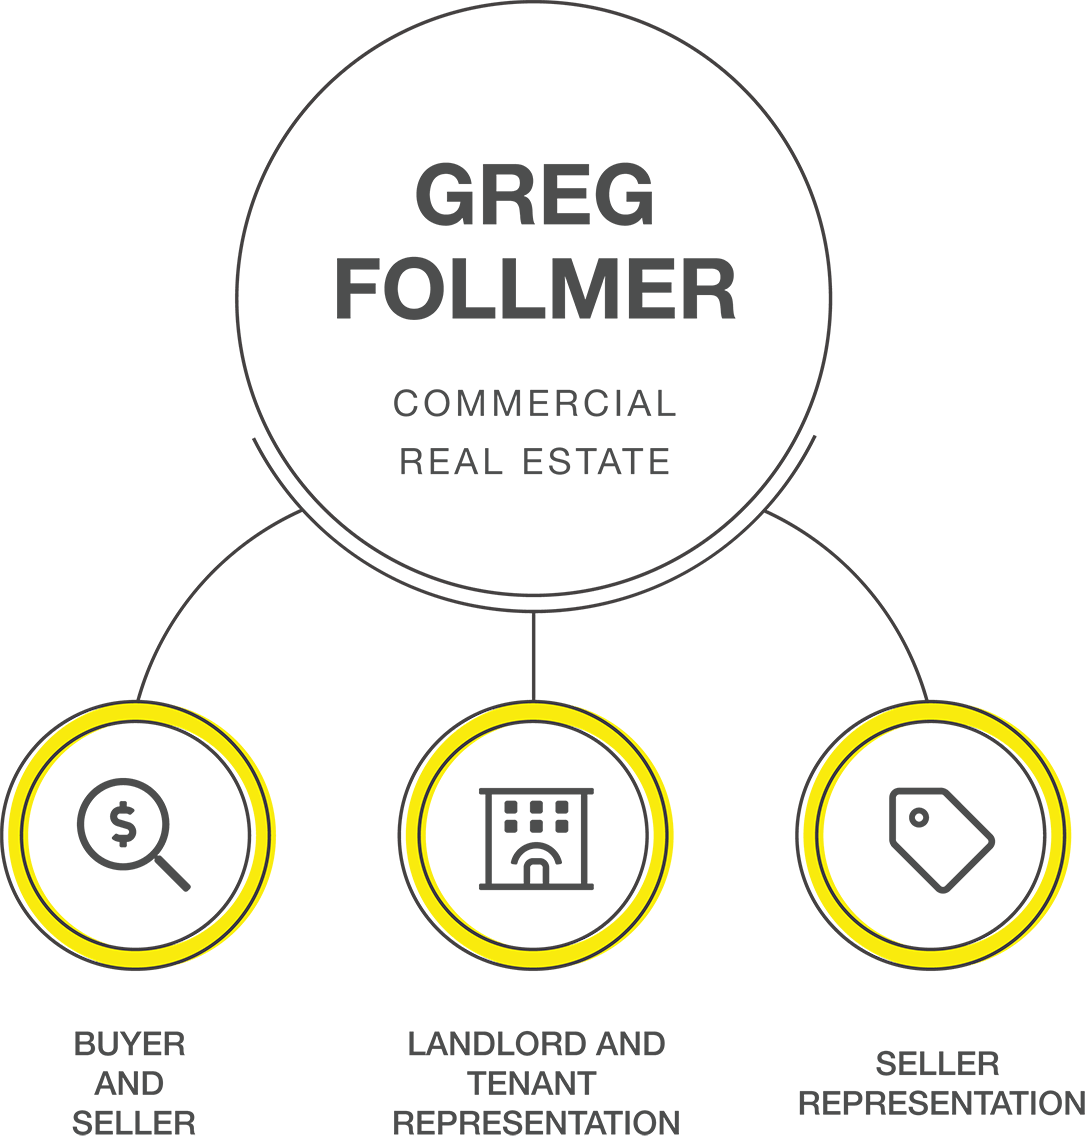 Greg Follmer Commercial Real Estate Services Chart